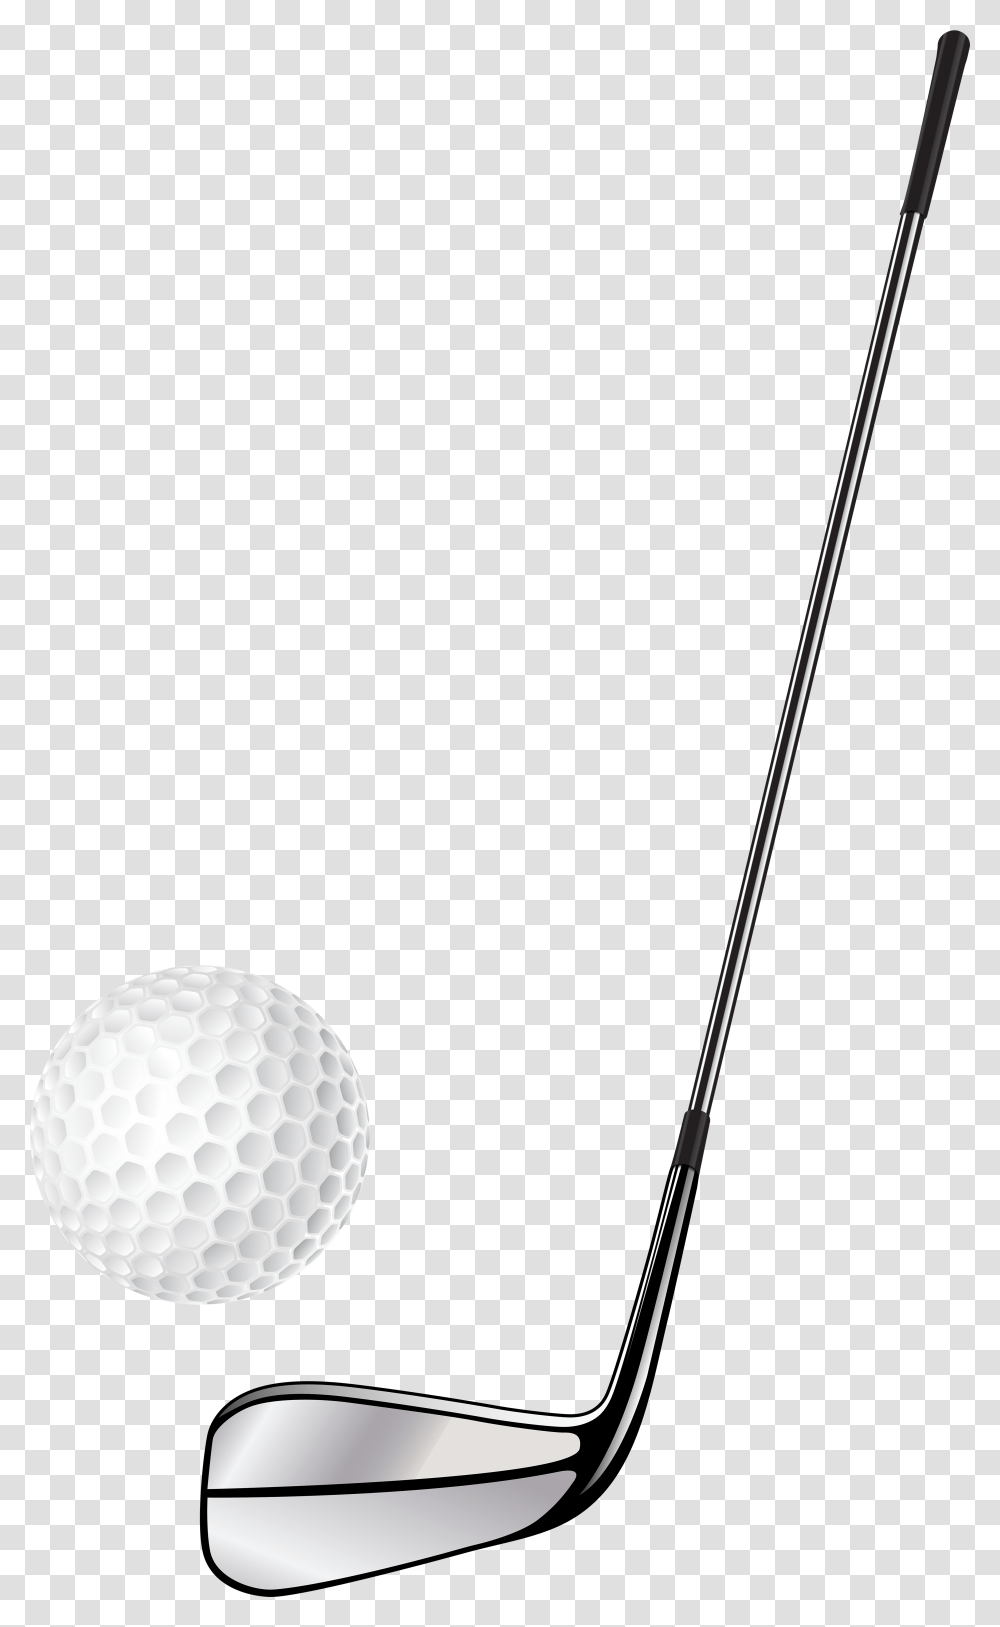 Club Vector Library Download Files Golf Club And Ball, Sport, Sports, Golf Ball, Putter Transparent Png